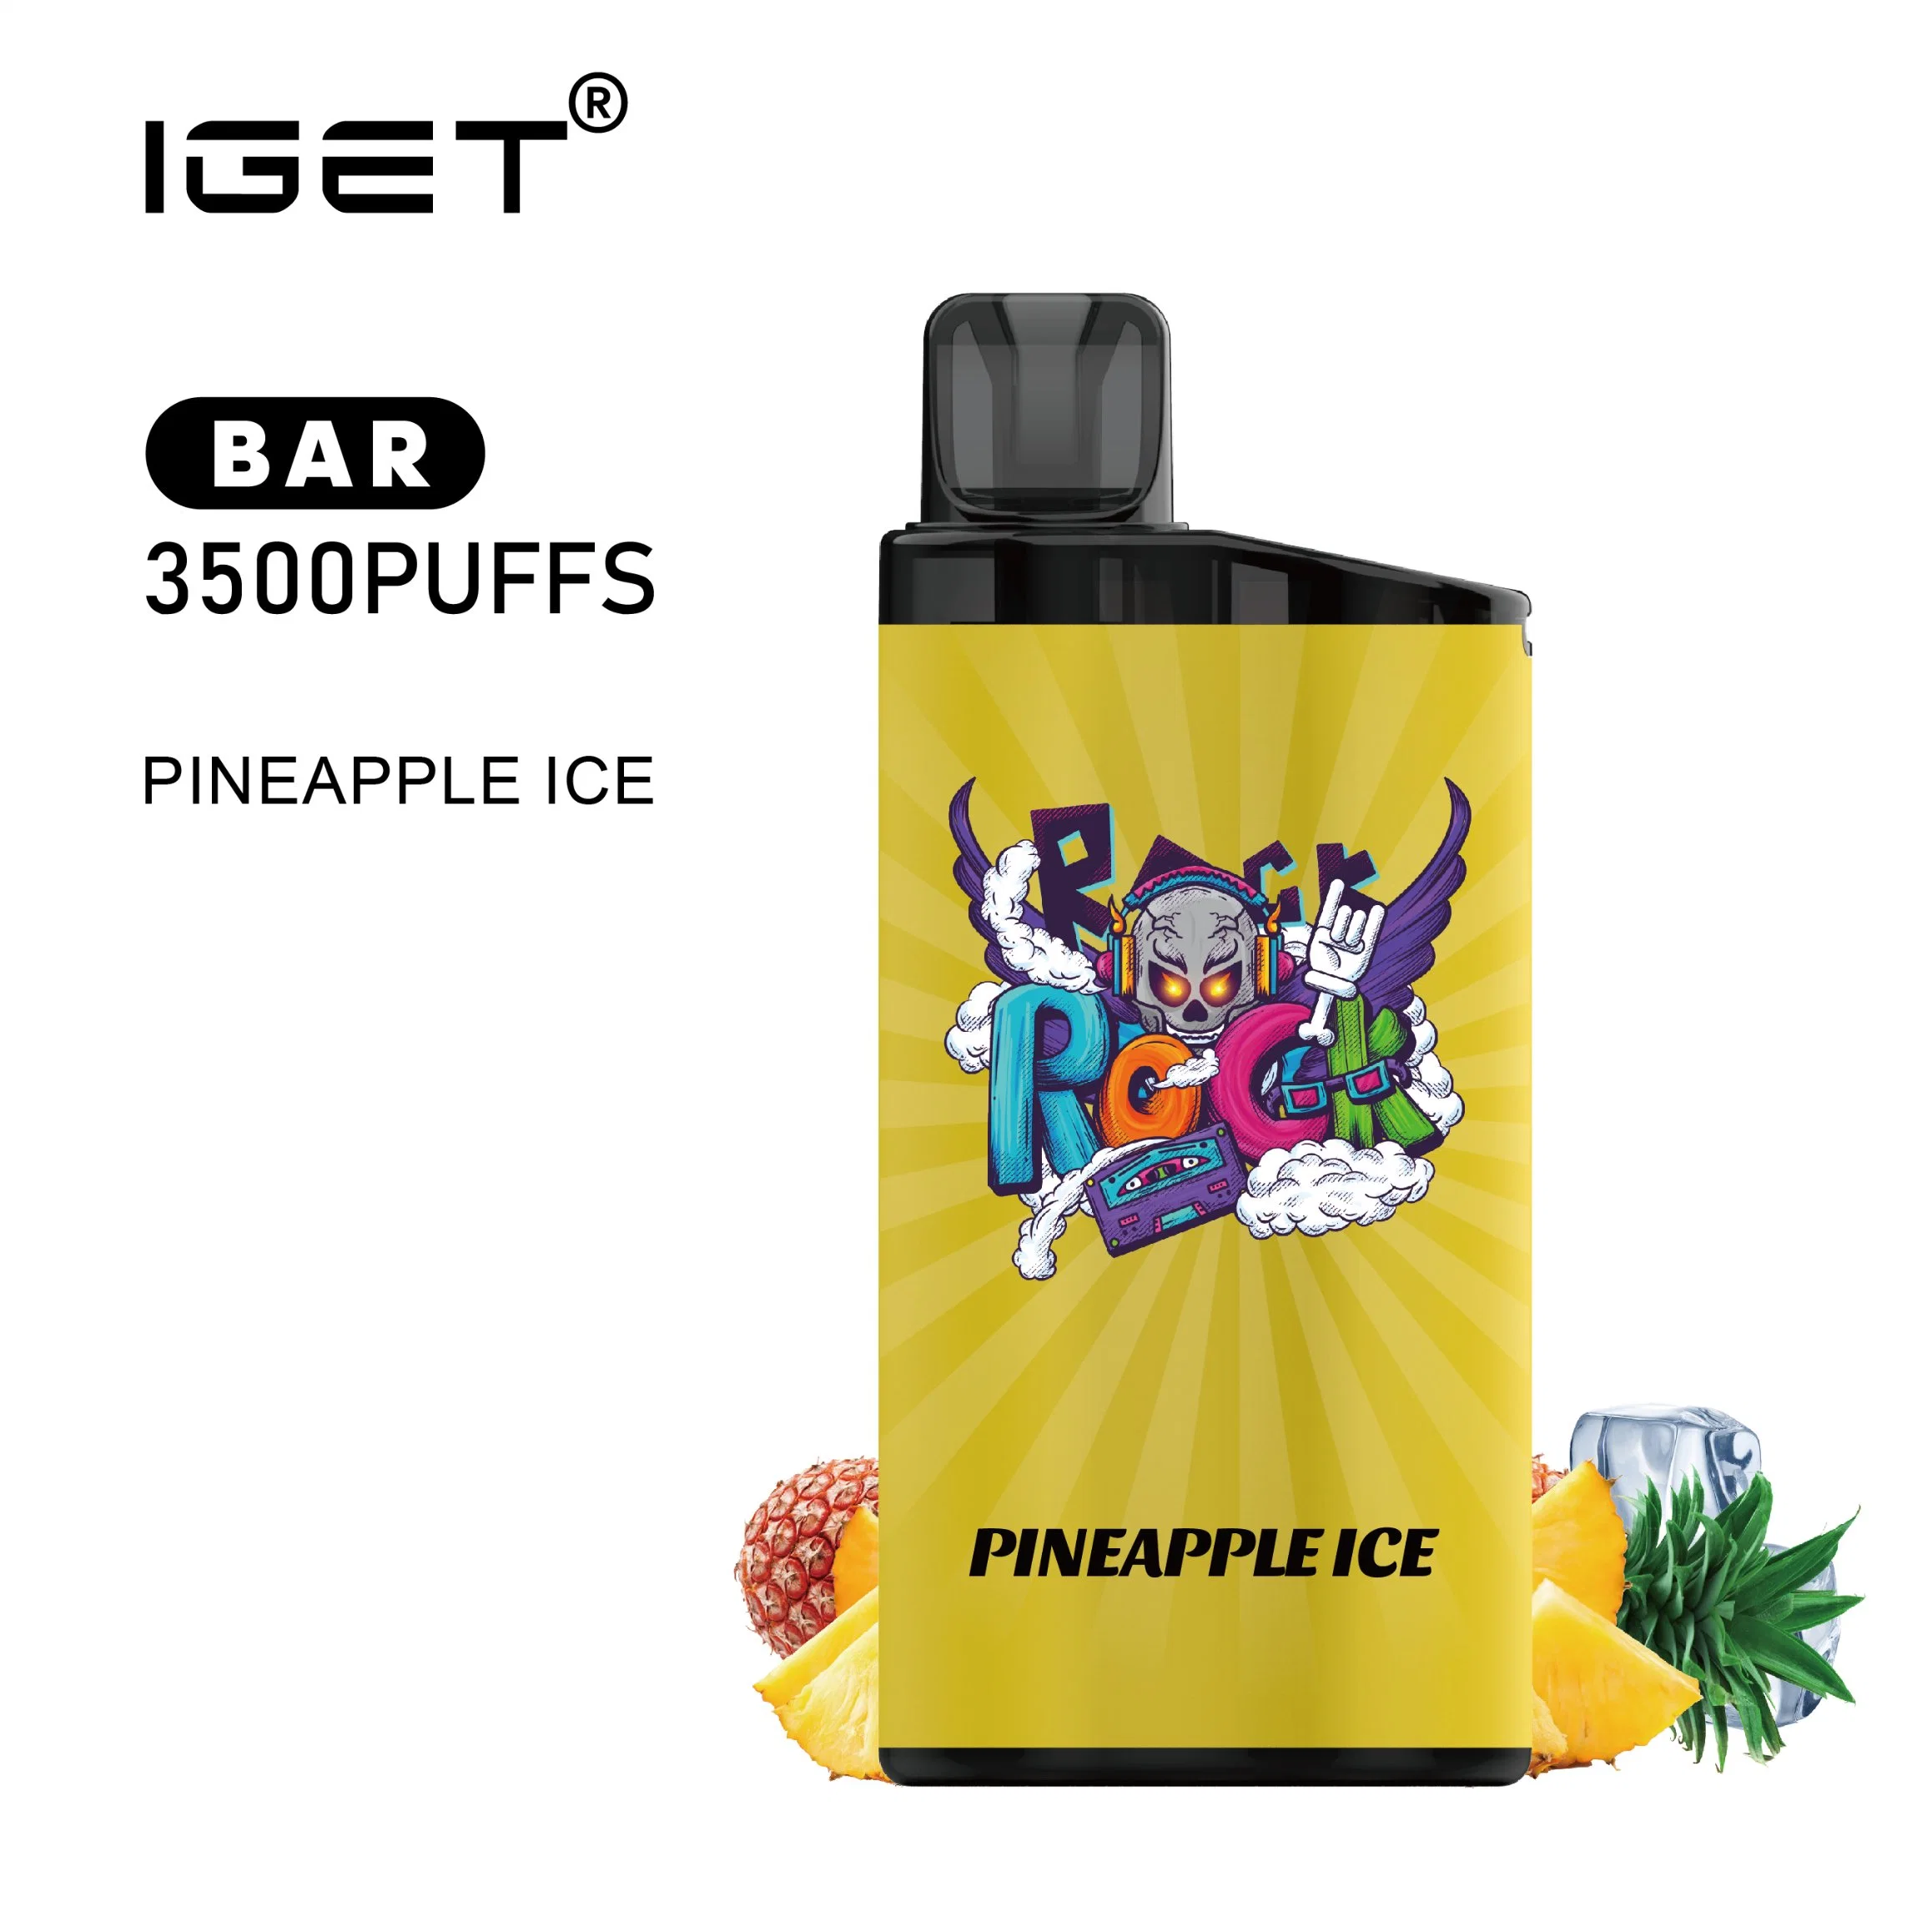 Iget Bar 3500puffs Hot Sale in Nz and Au